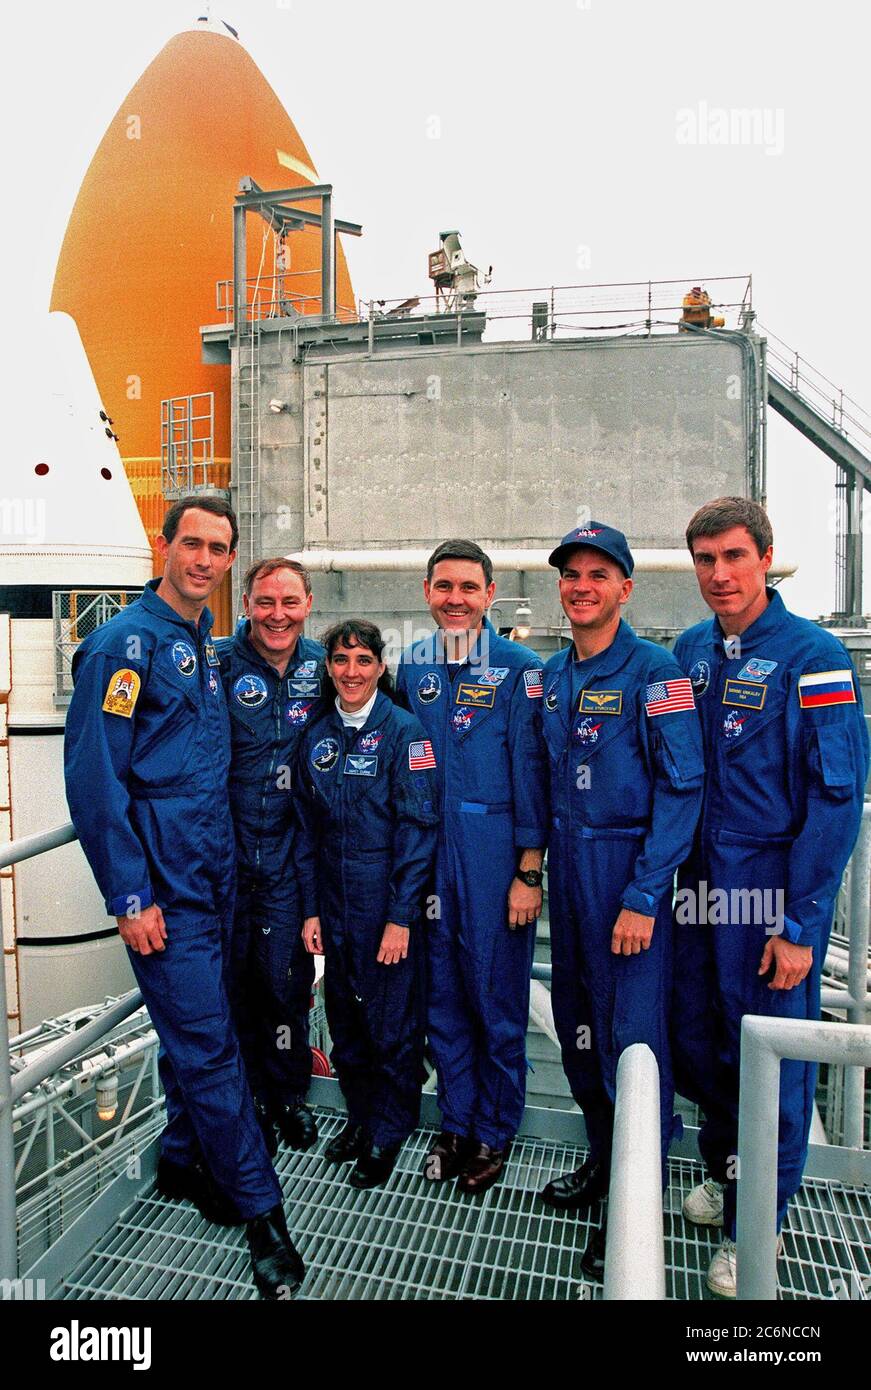 STS-88 crew members pose for a photograph during a break in emergency egress training on launch pad 39A. They are (left to right) Mission Specialists James H. Newman , Jerry L. Ross and Nancy J. Currie, Mission Commander Robert D. Cabana, Pilot Frederick W. 'Rick' Sturckow and Mission Specialist Sergei Krikalev, a Russian cosmonaut. Stock Photo